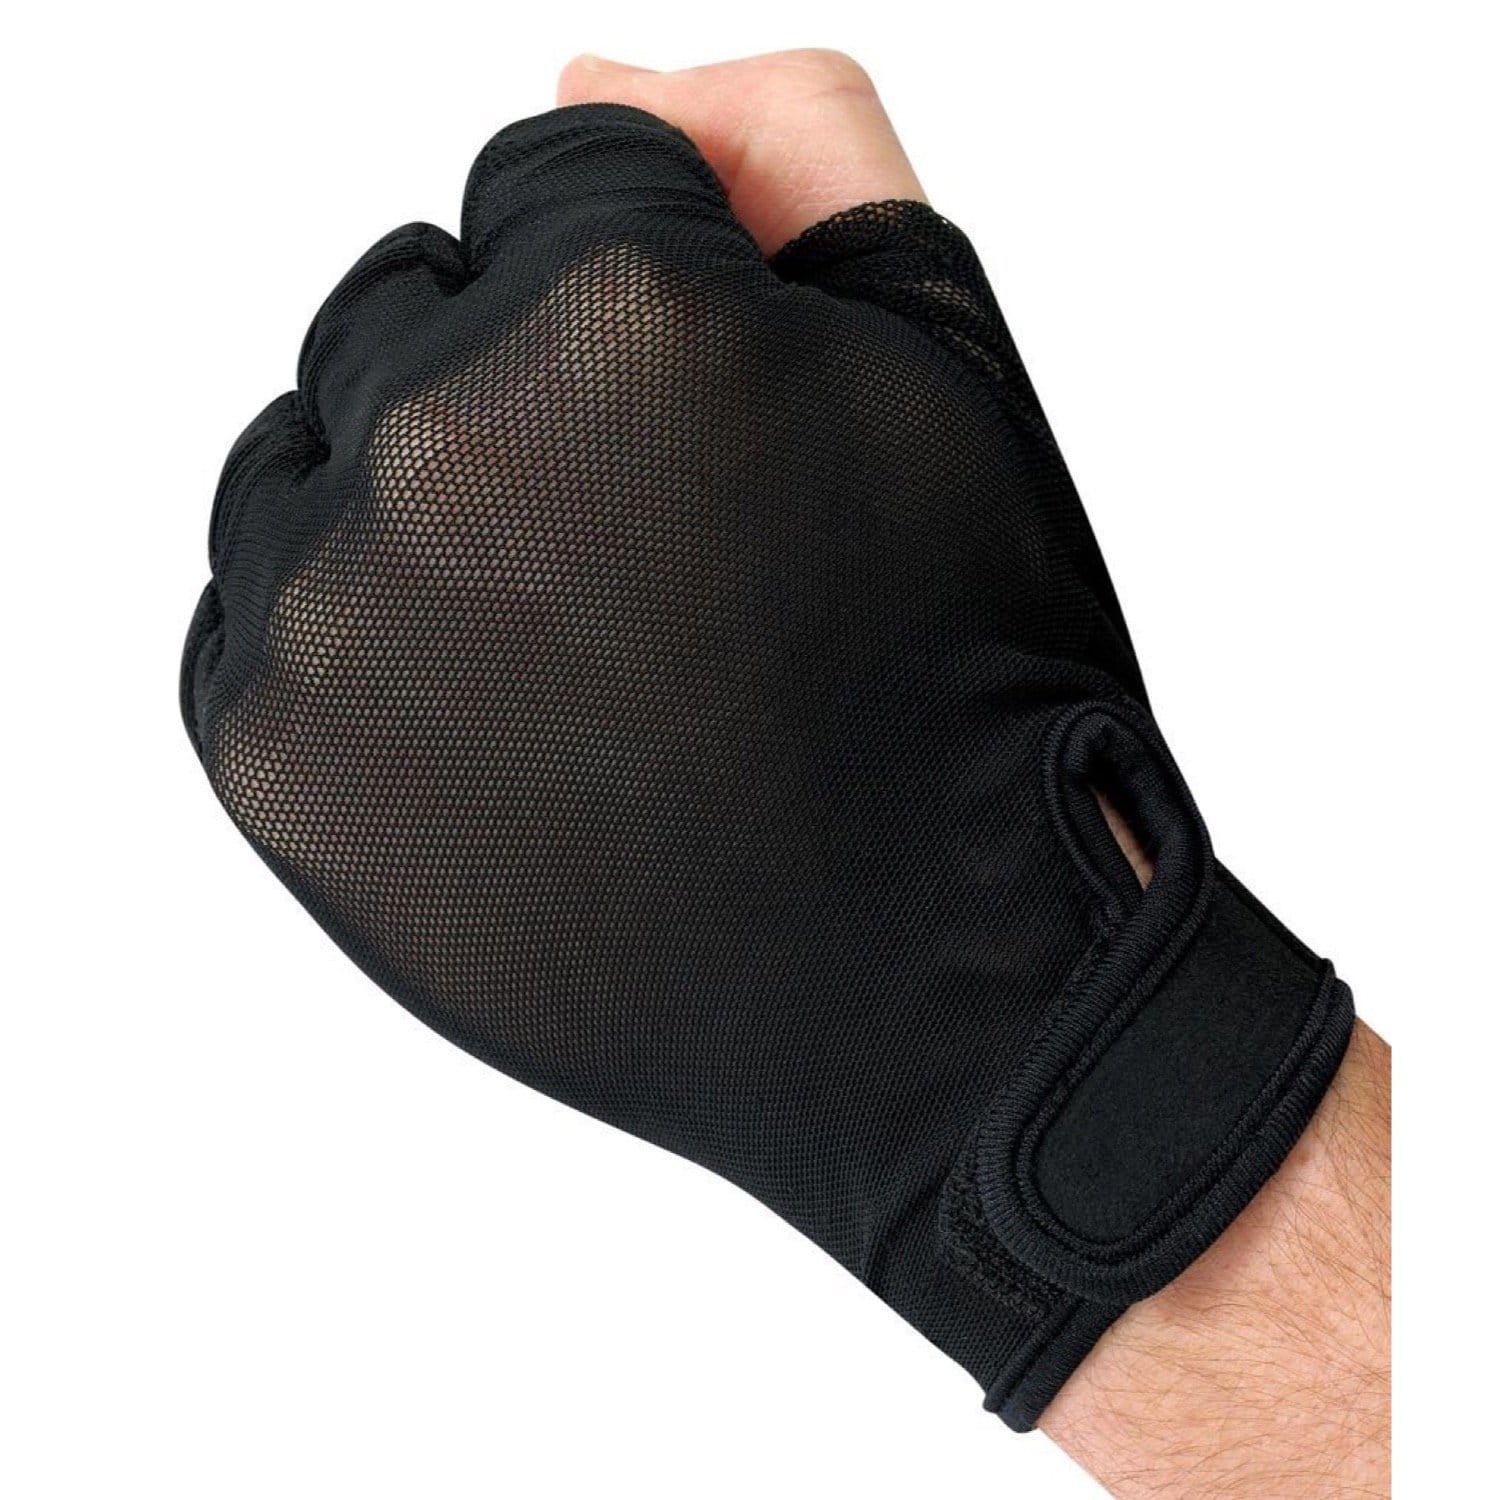 StylePlus Grip Factor Fingerless Guard Gloves ― item# 15440, Marching  Band, Color Guard, Percussion, Parade